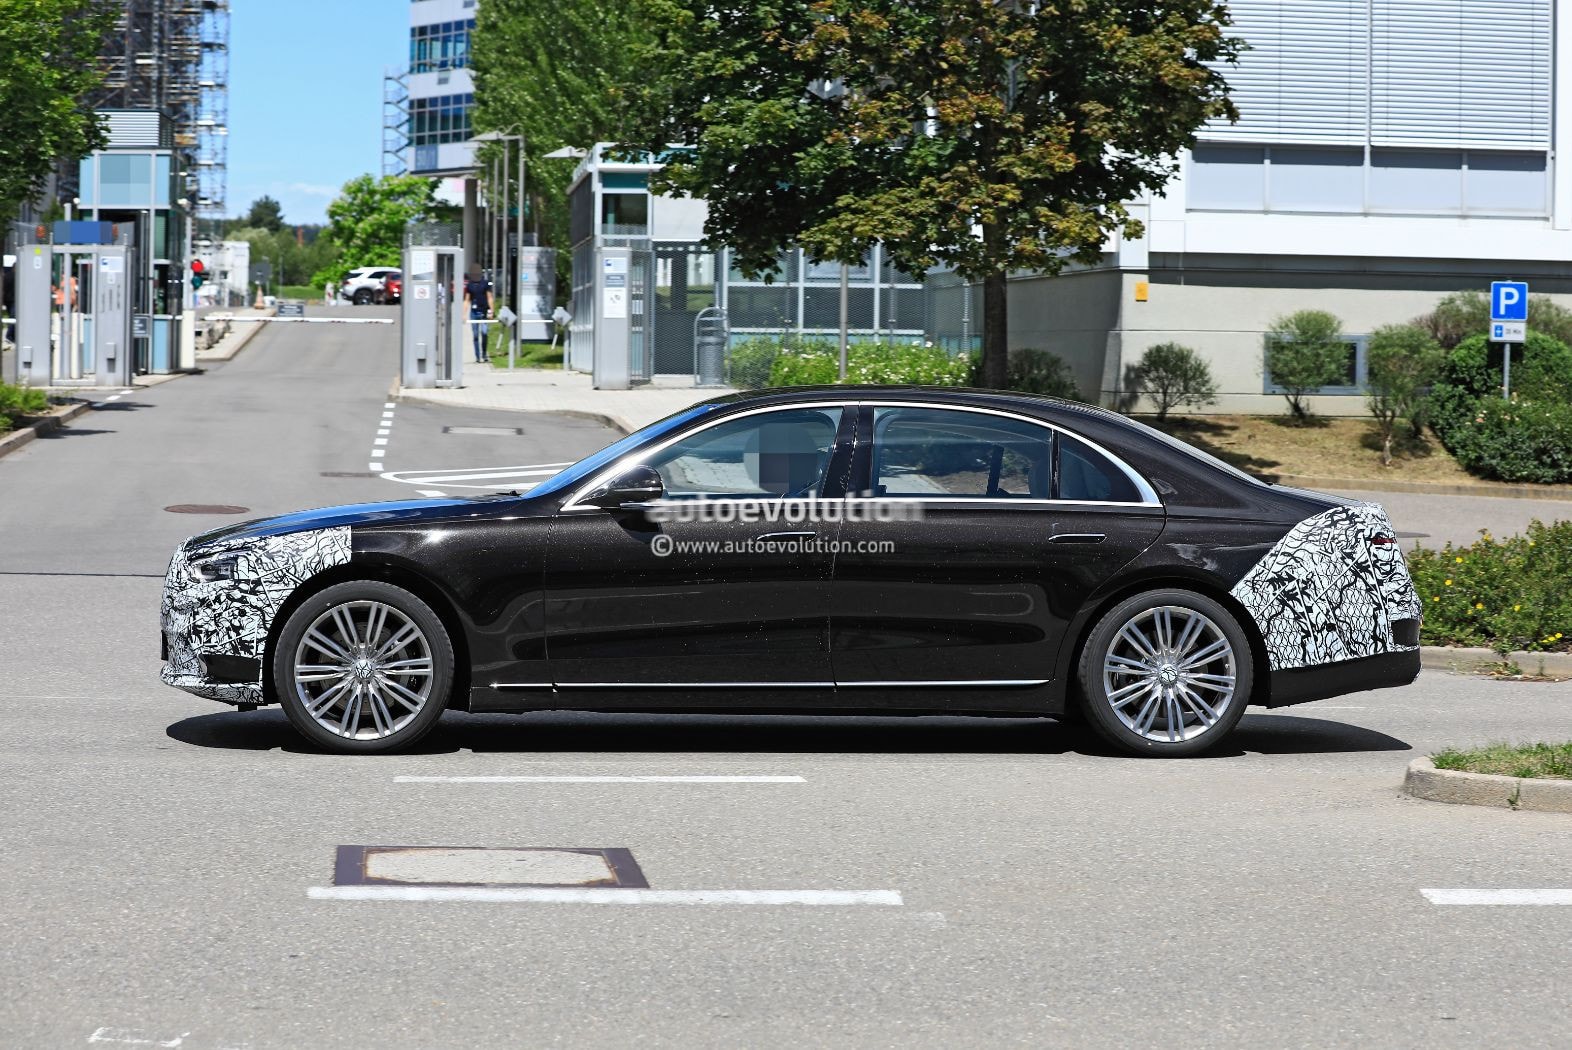 2021 Mercedes Benz S Class W223 Spied Nearly Naked In Germany Autoevolution